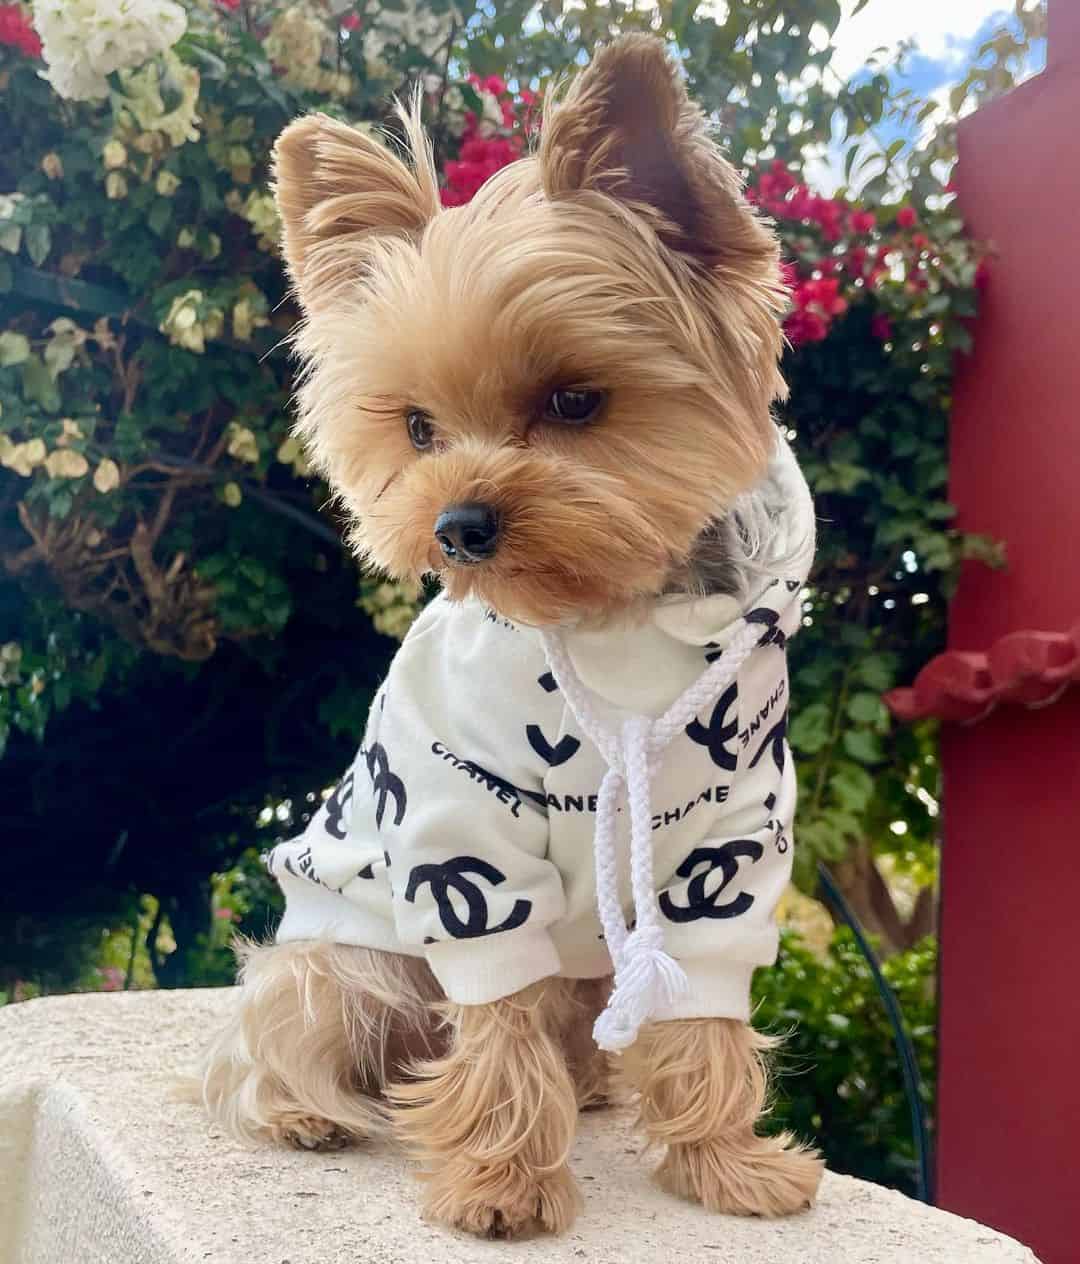 Chewy V Dog Sweater - The Supreme Paw Supply